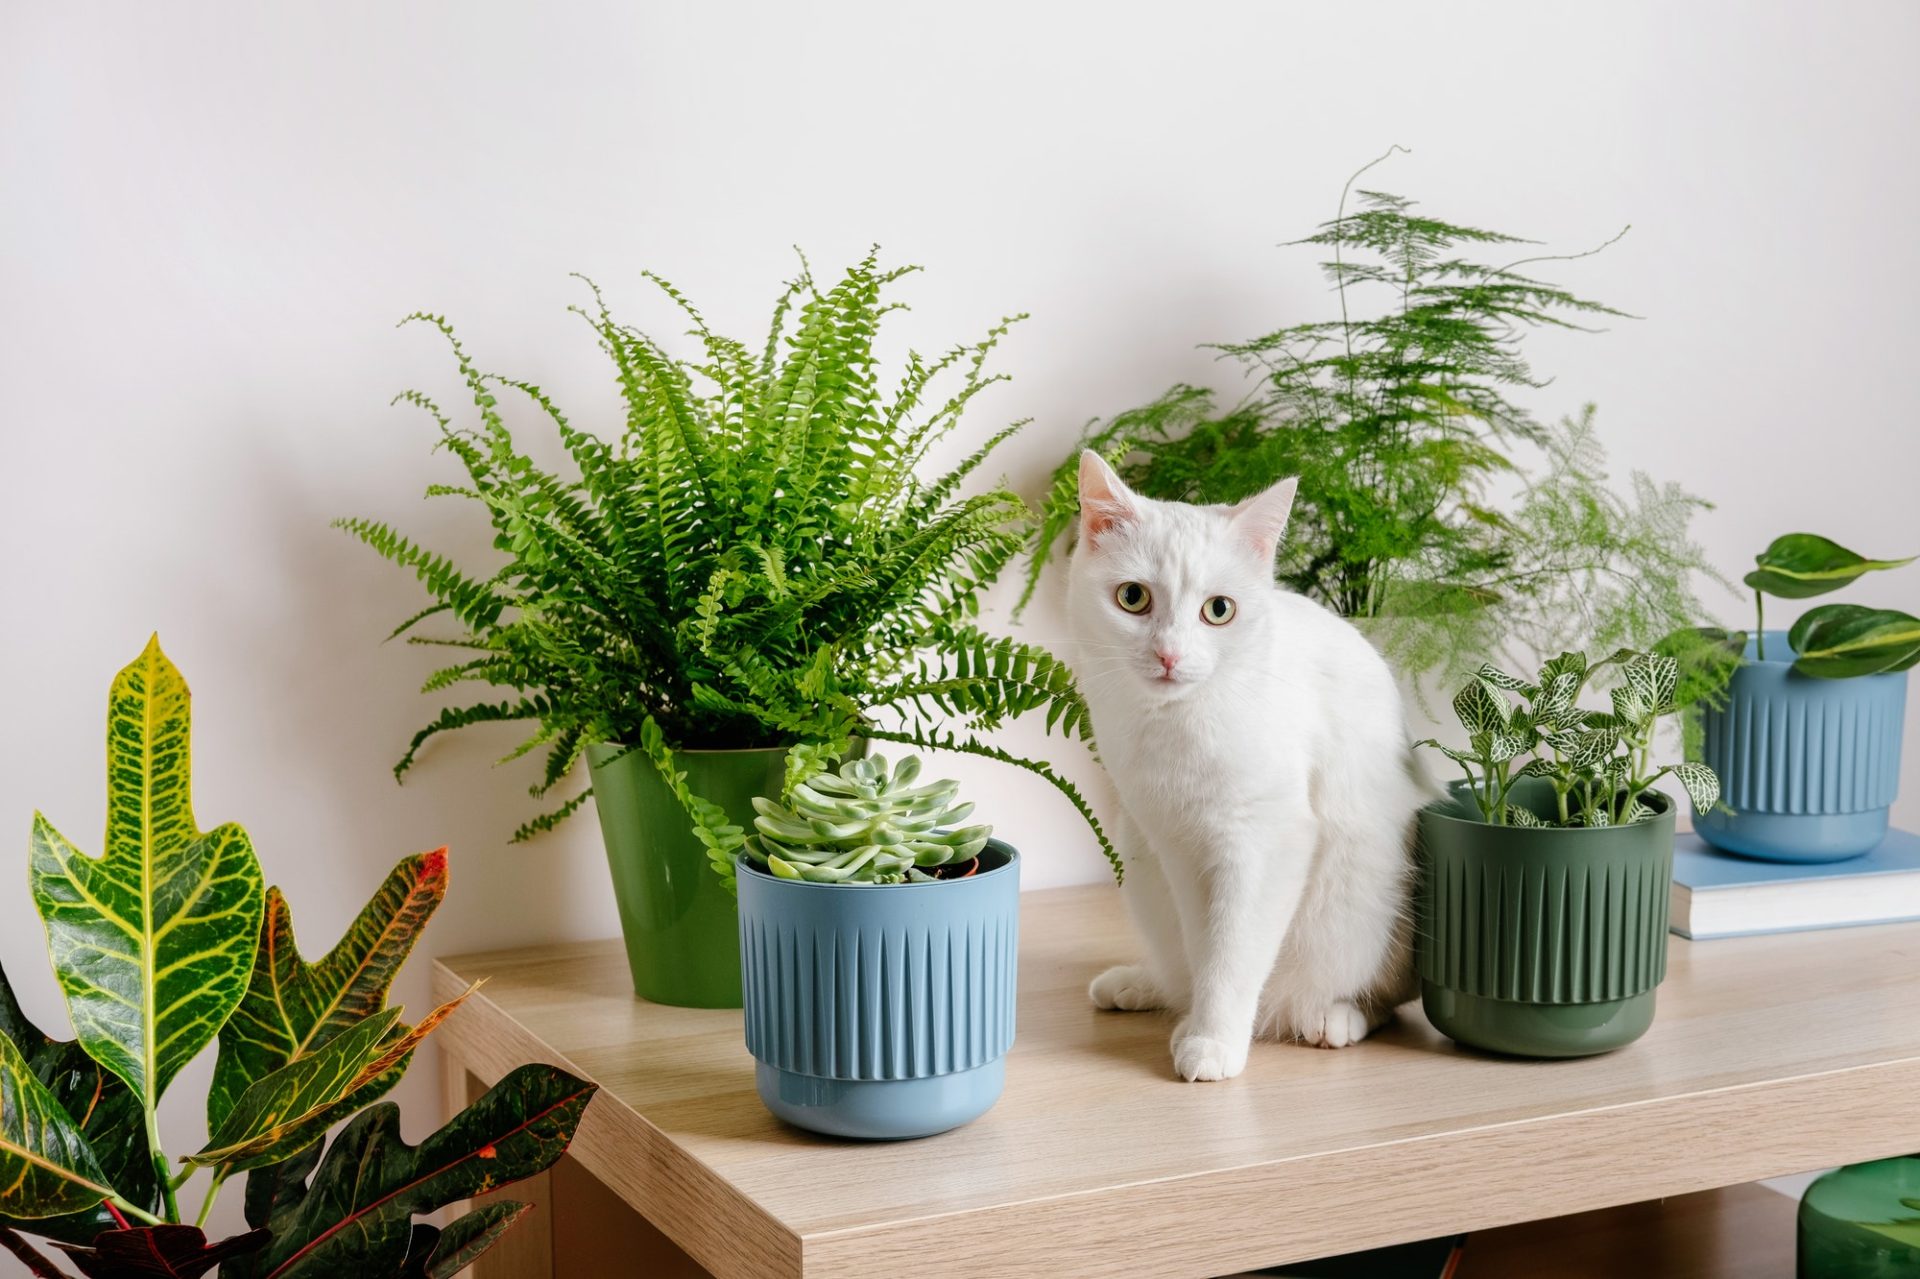 Cute white cat sitting on table near indoors houseplants.